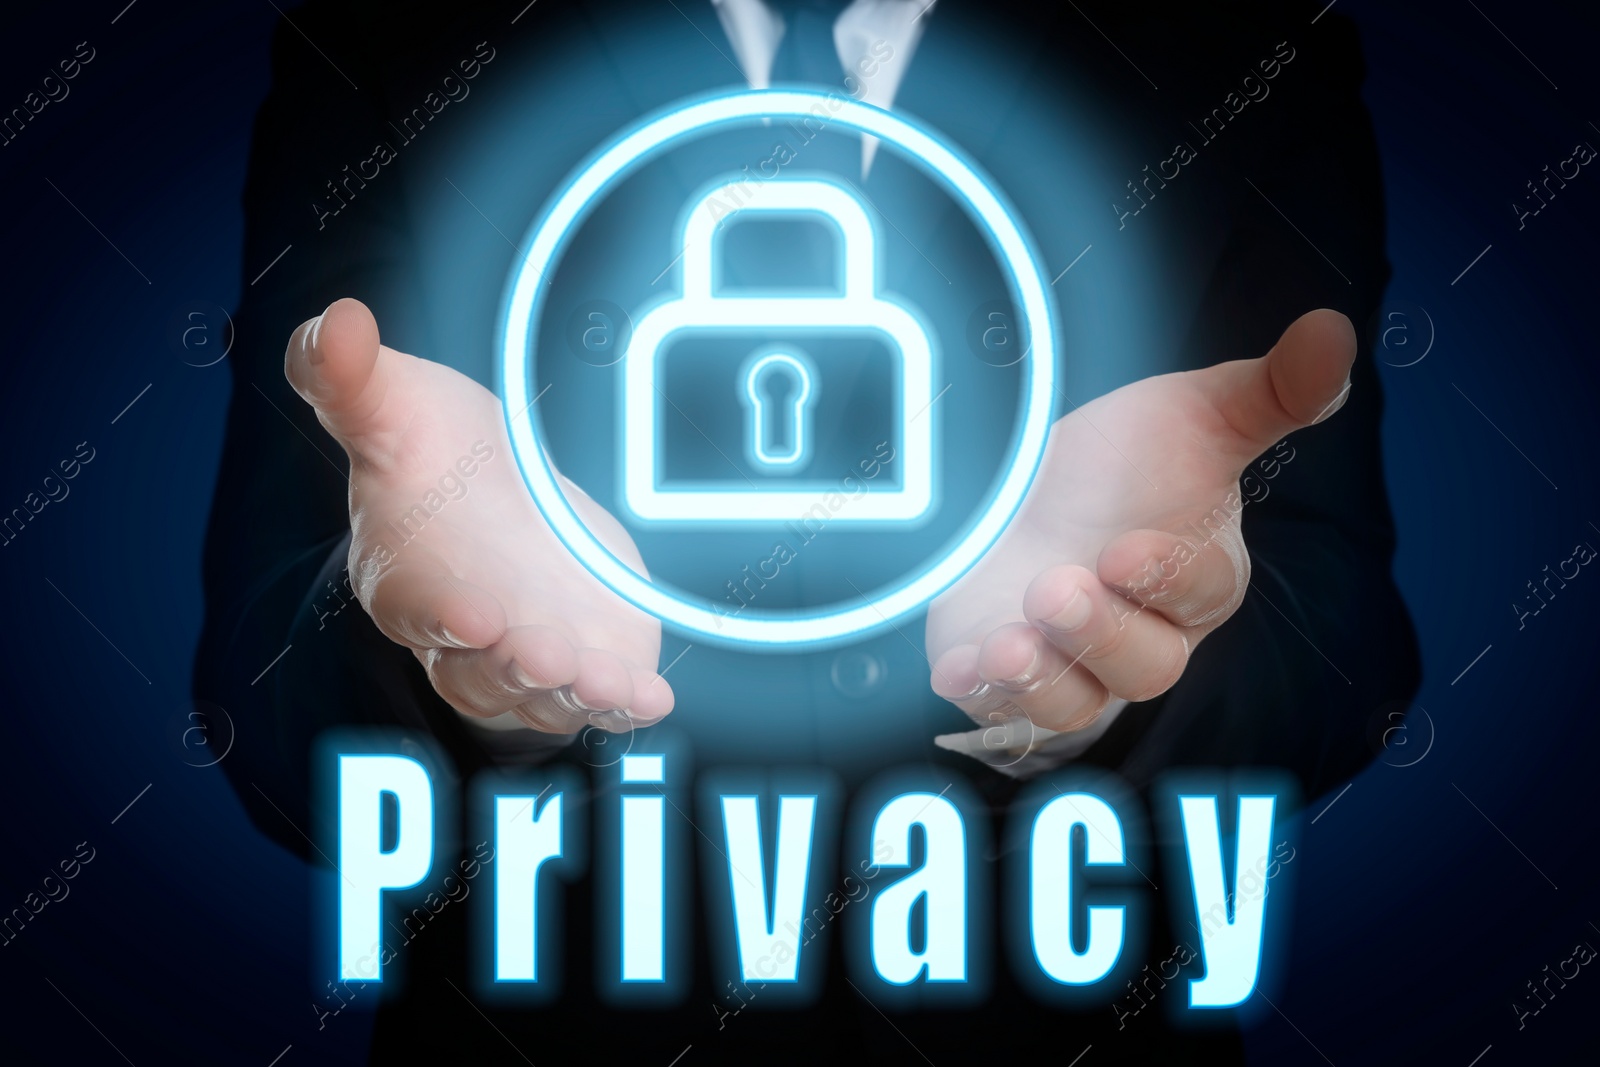 Image of Privacy policy. Man holding button with padlock against dark blue background, closeup